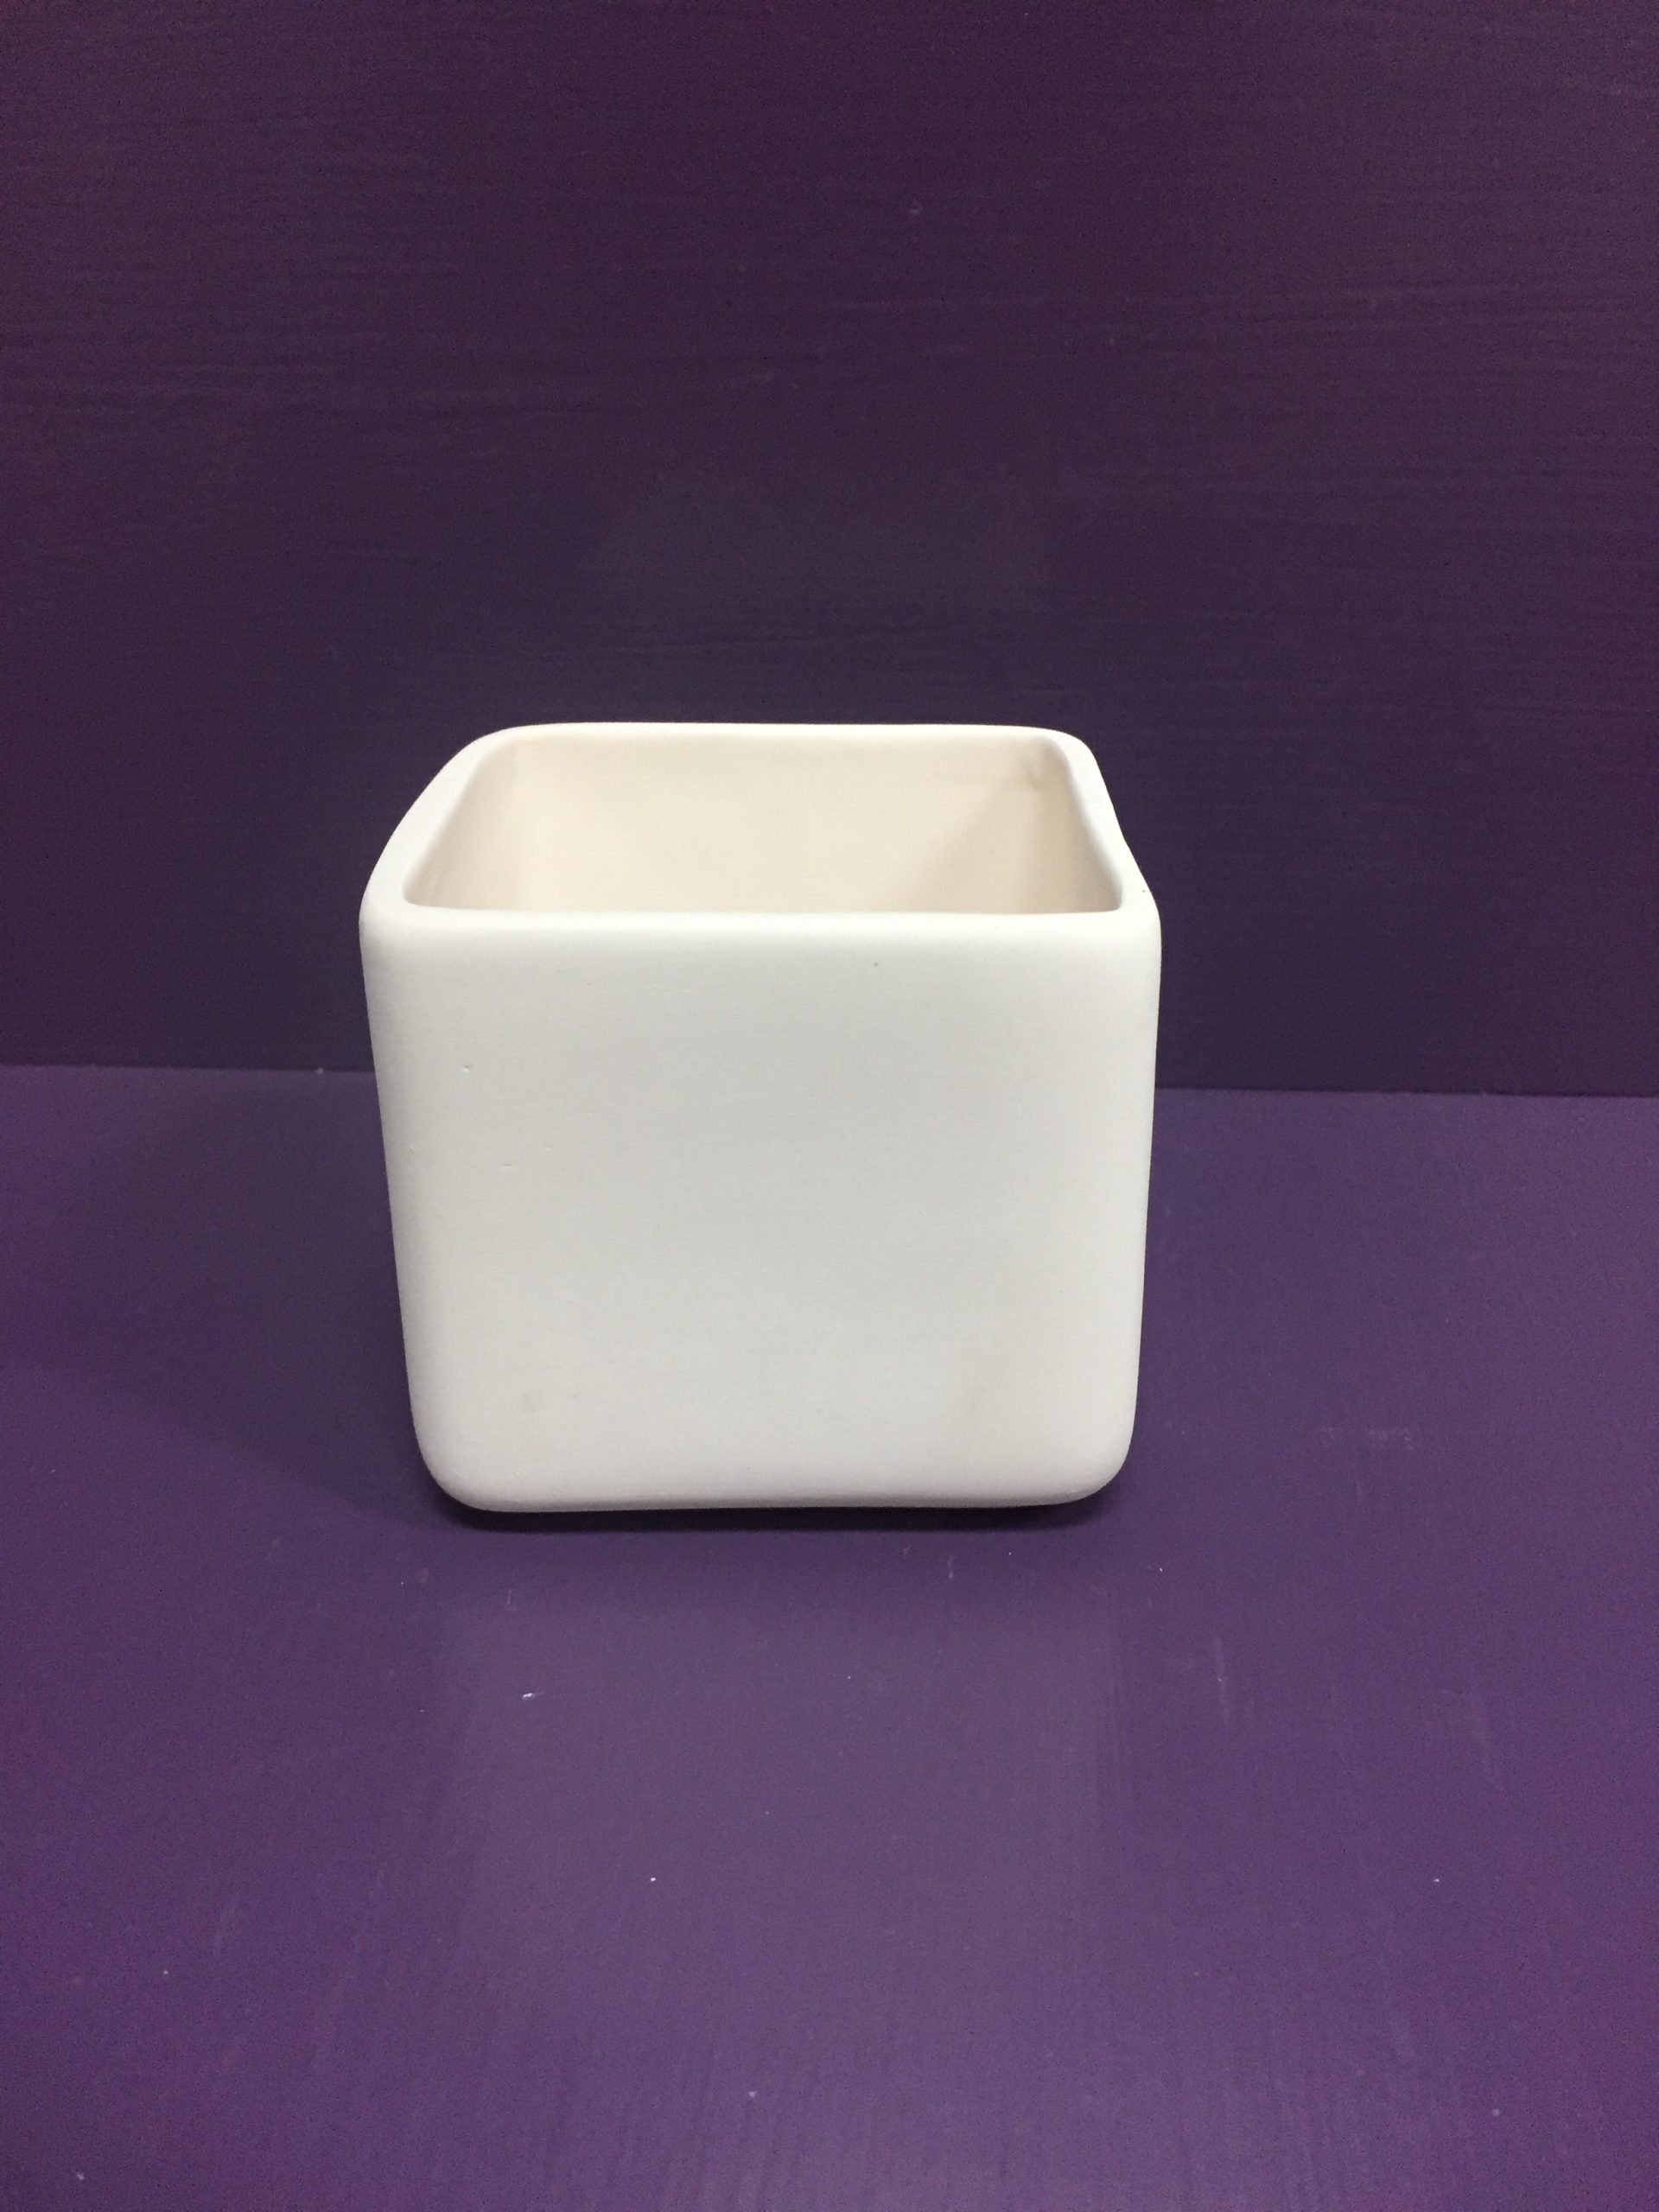 Small Square Planter Pottery To-Go - Fused Glass | Pottery Painting ...